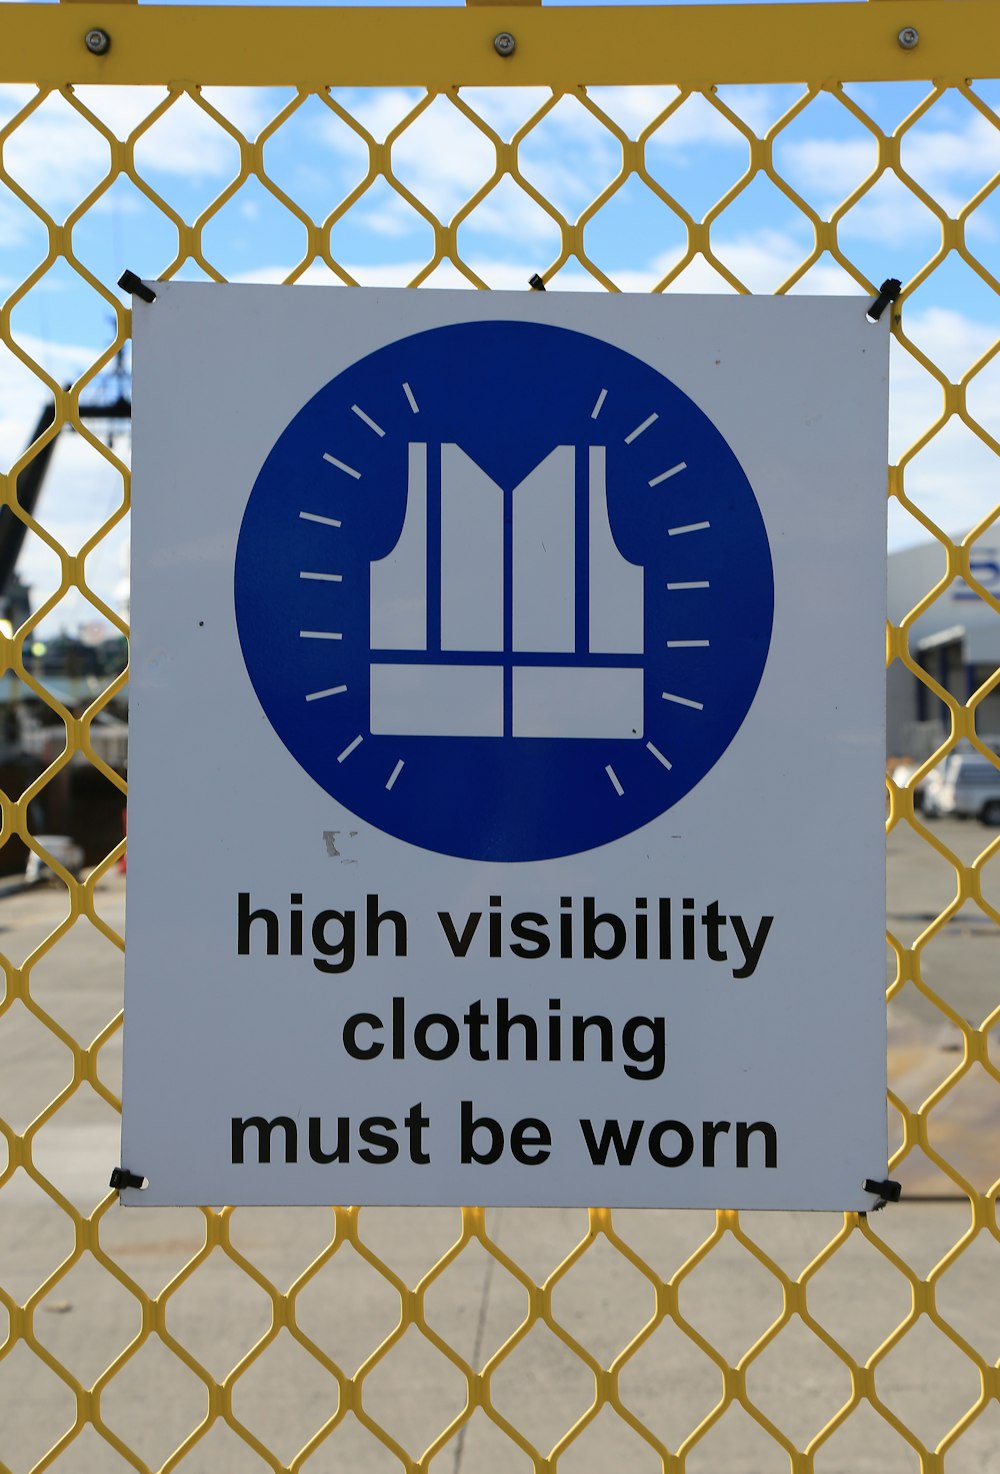 a sign on a chain link fence that says high visibility clothing must be worn